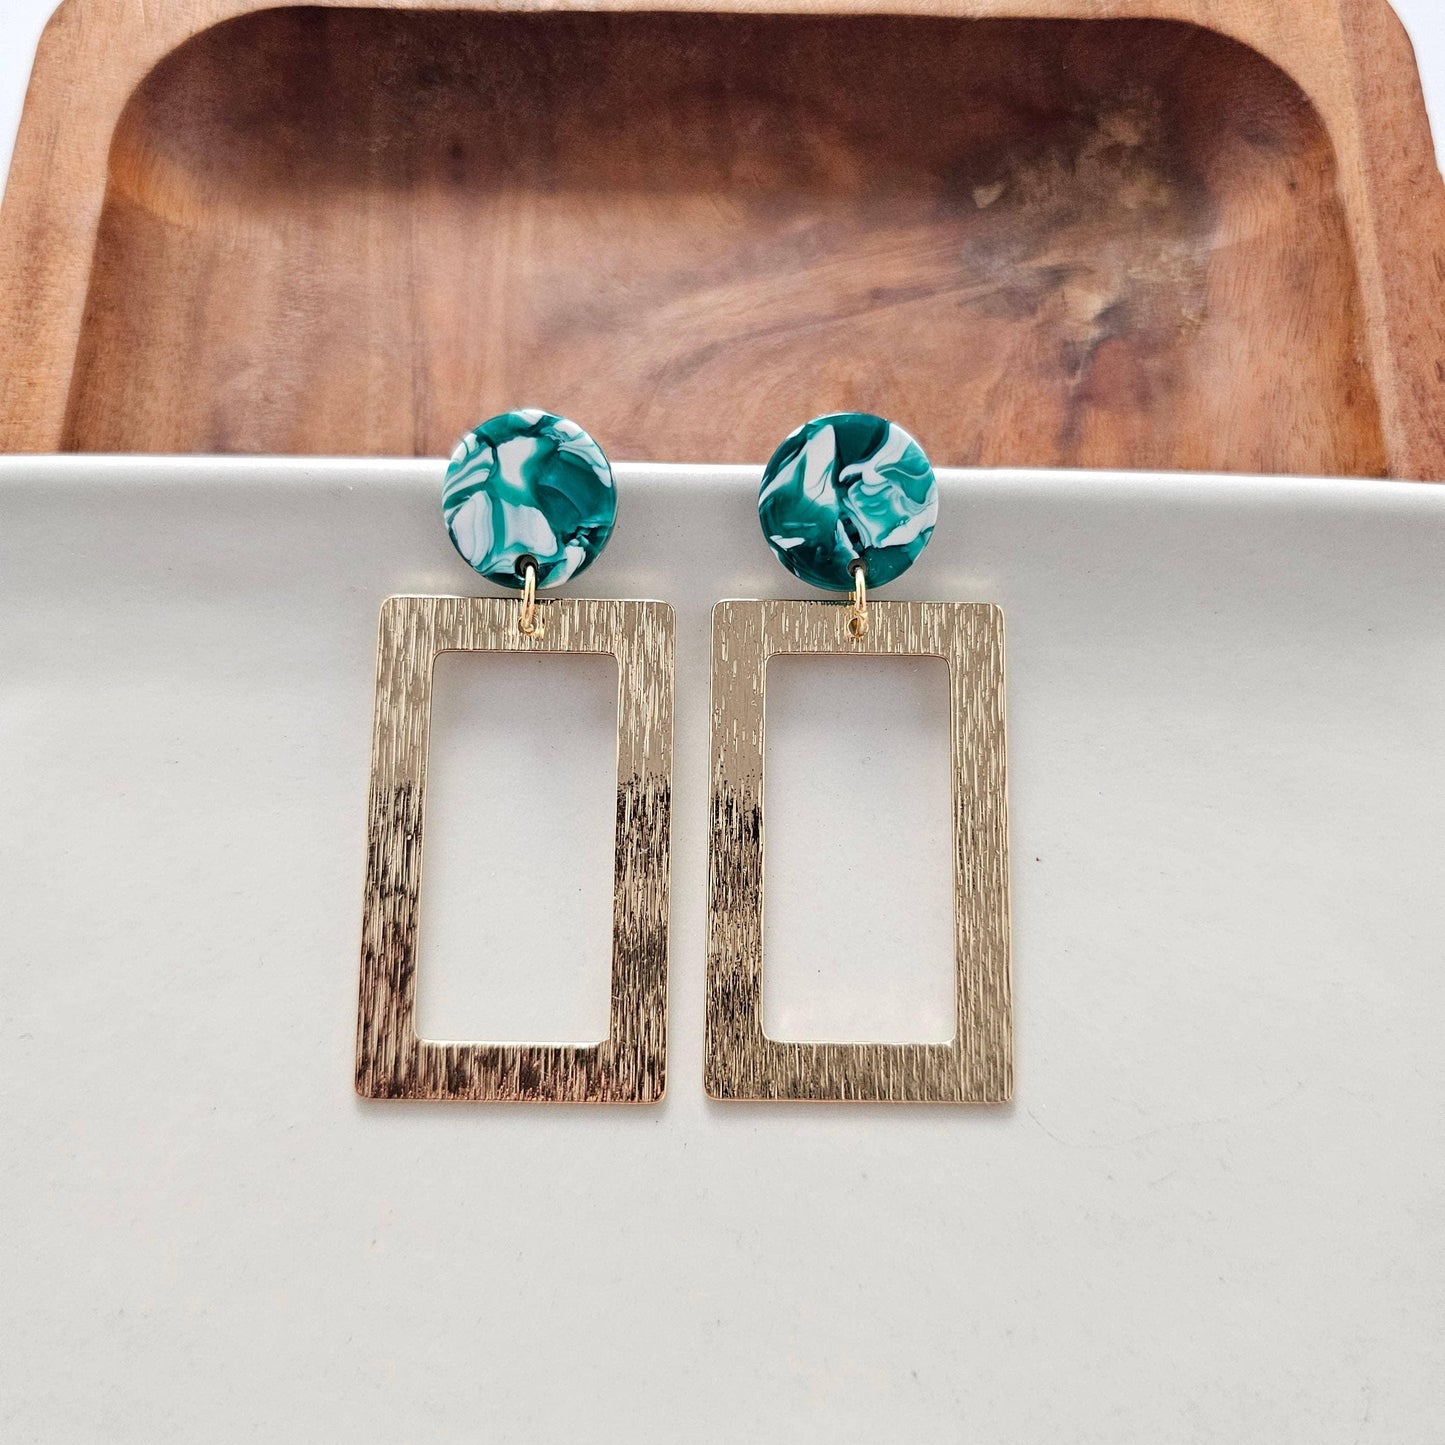 Rebecca Earrings - Sea Green // Spring, Summer, Mother's Day - HERS